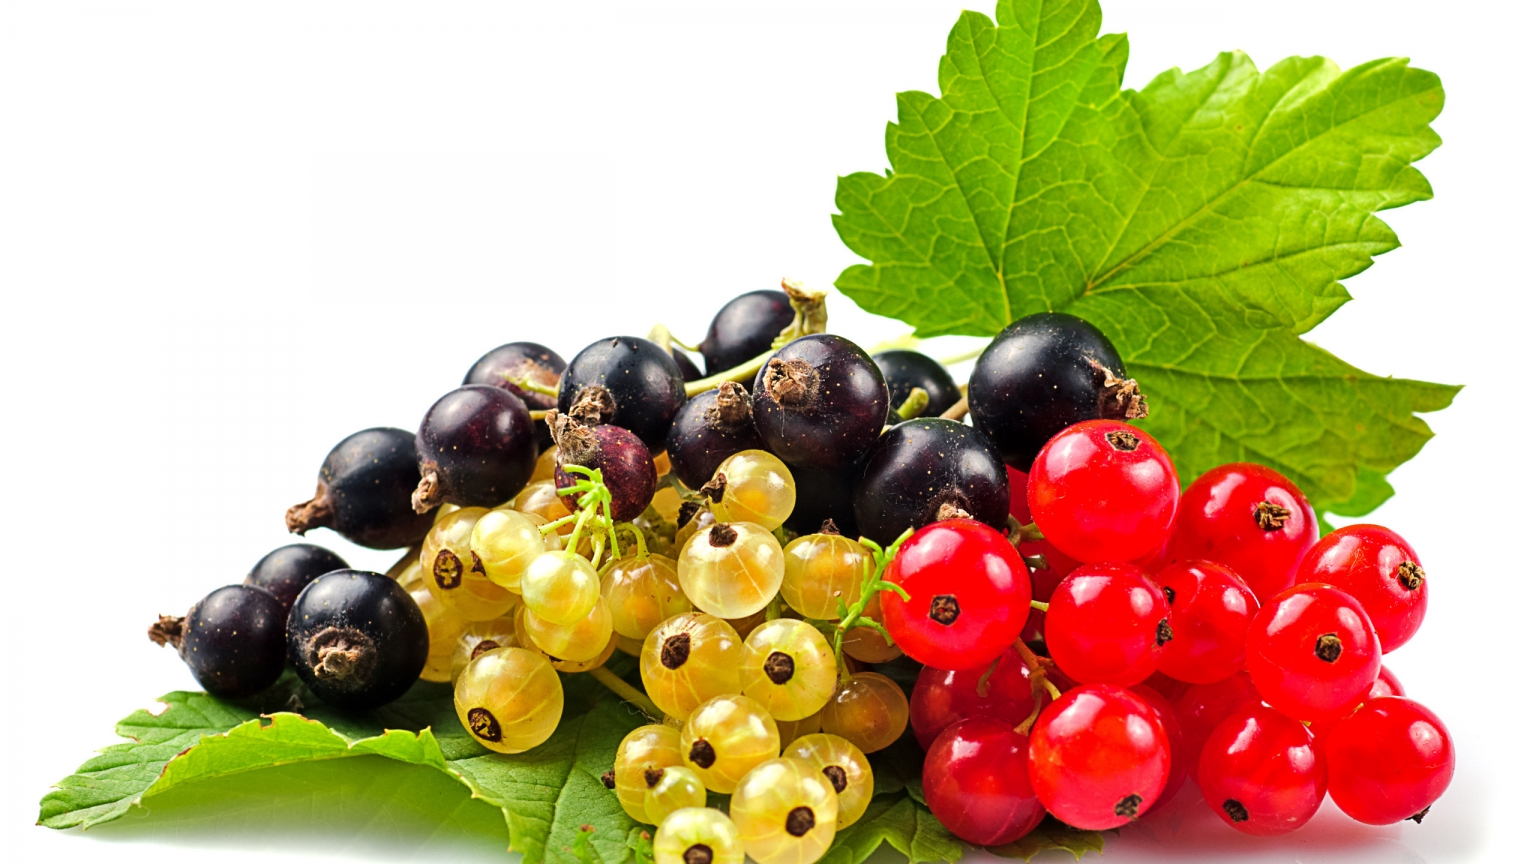 Currants Selection for 1536 x 864 HDTV resolution